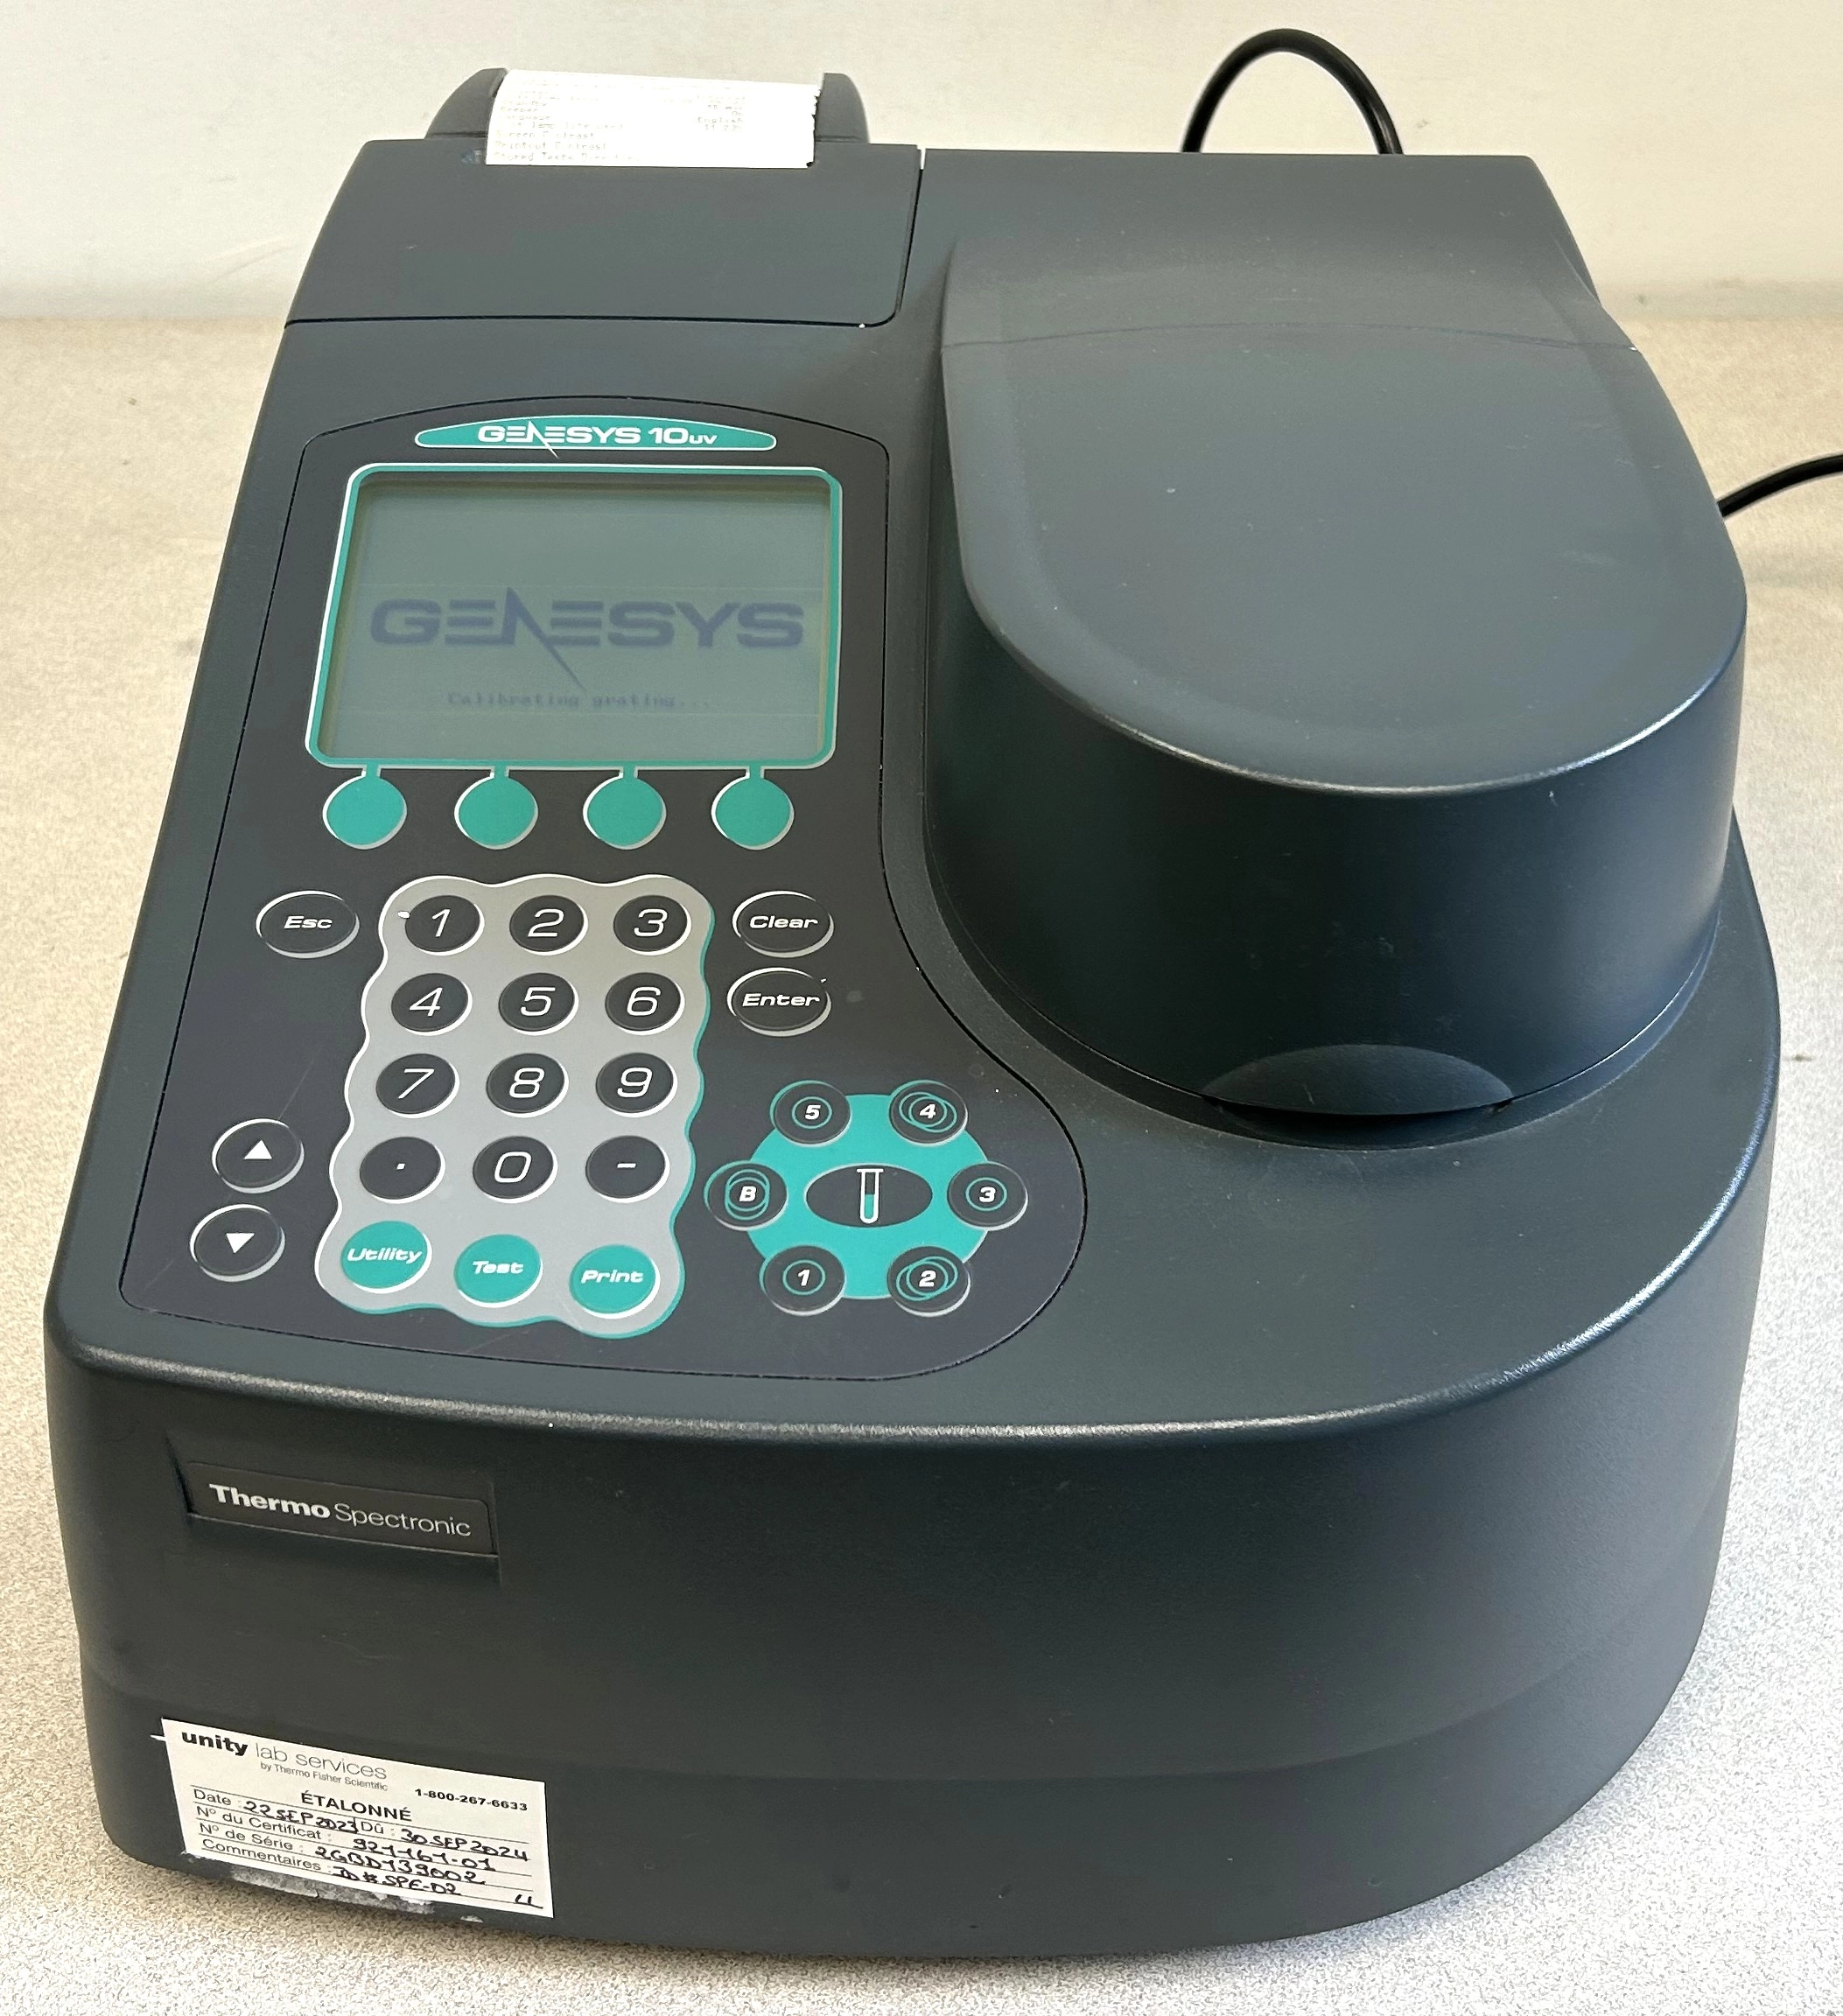 ThermoSpectronic Unicam Genesys 10UV Scanning UV-Visible Spectrophotometer (190 to 1100nm)